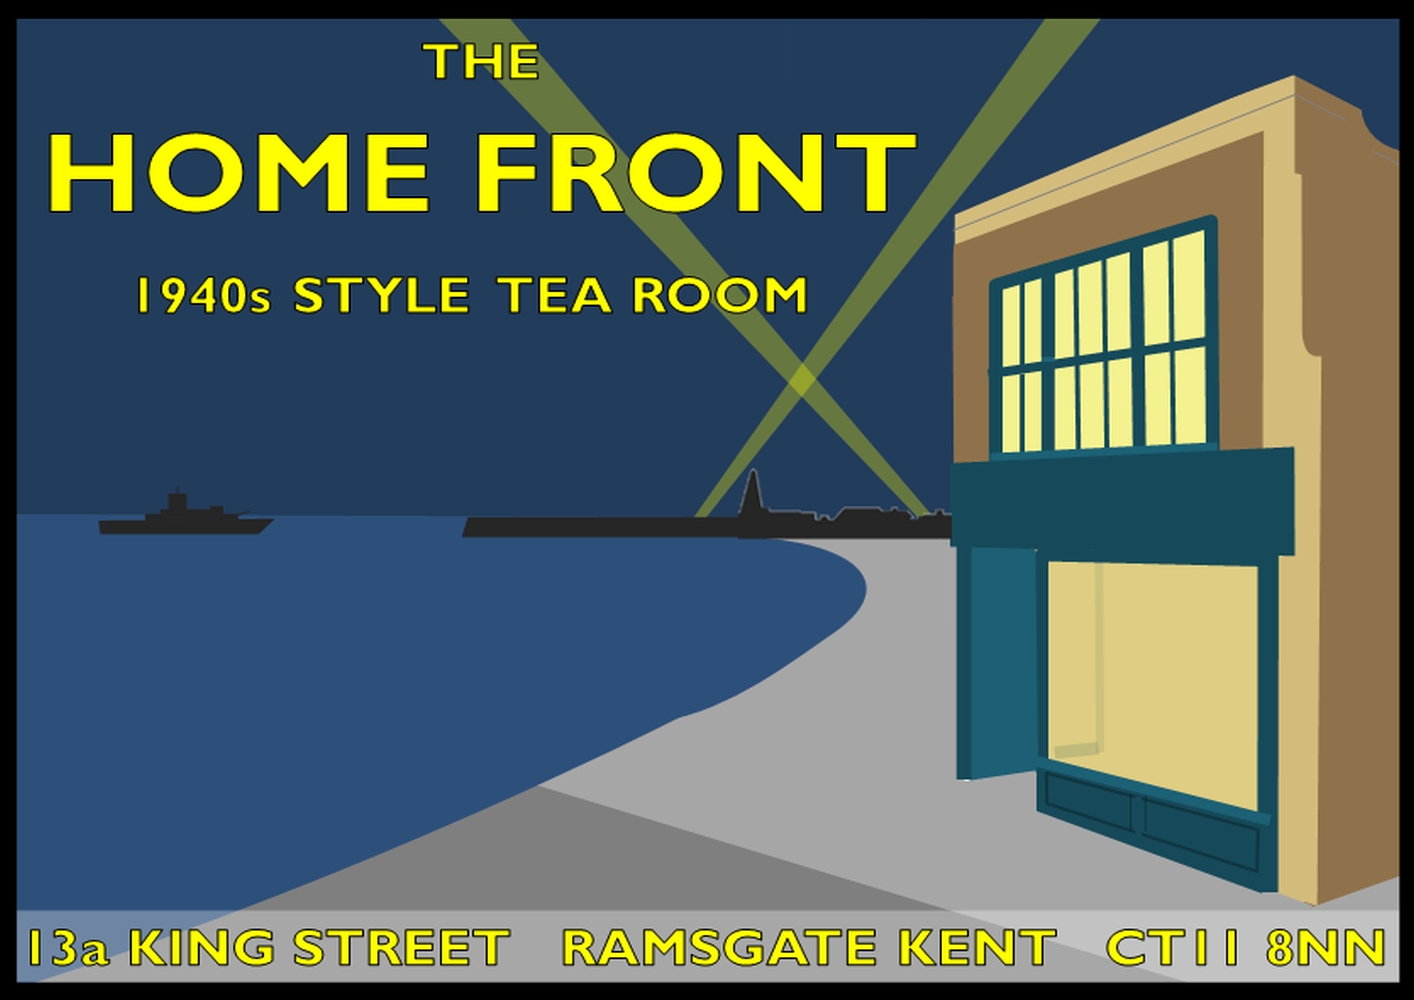 The home front tea room 13a King Street Ramsgate